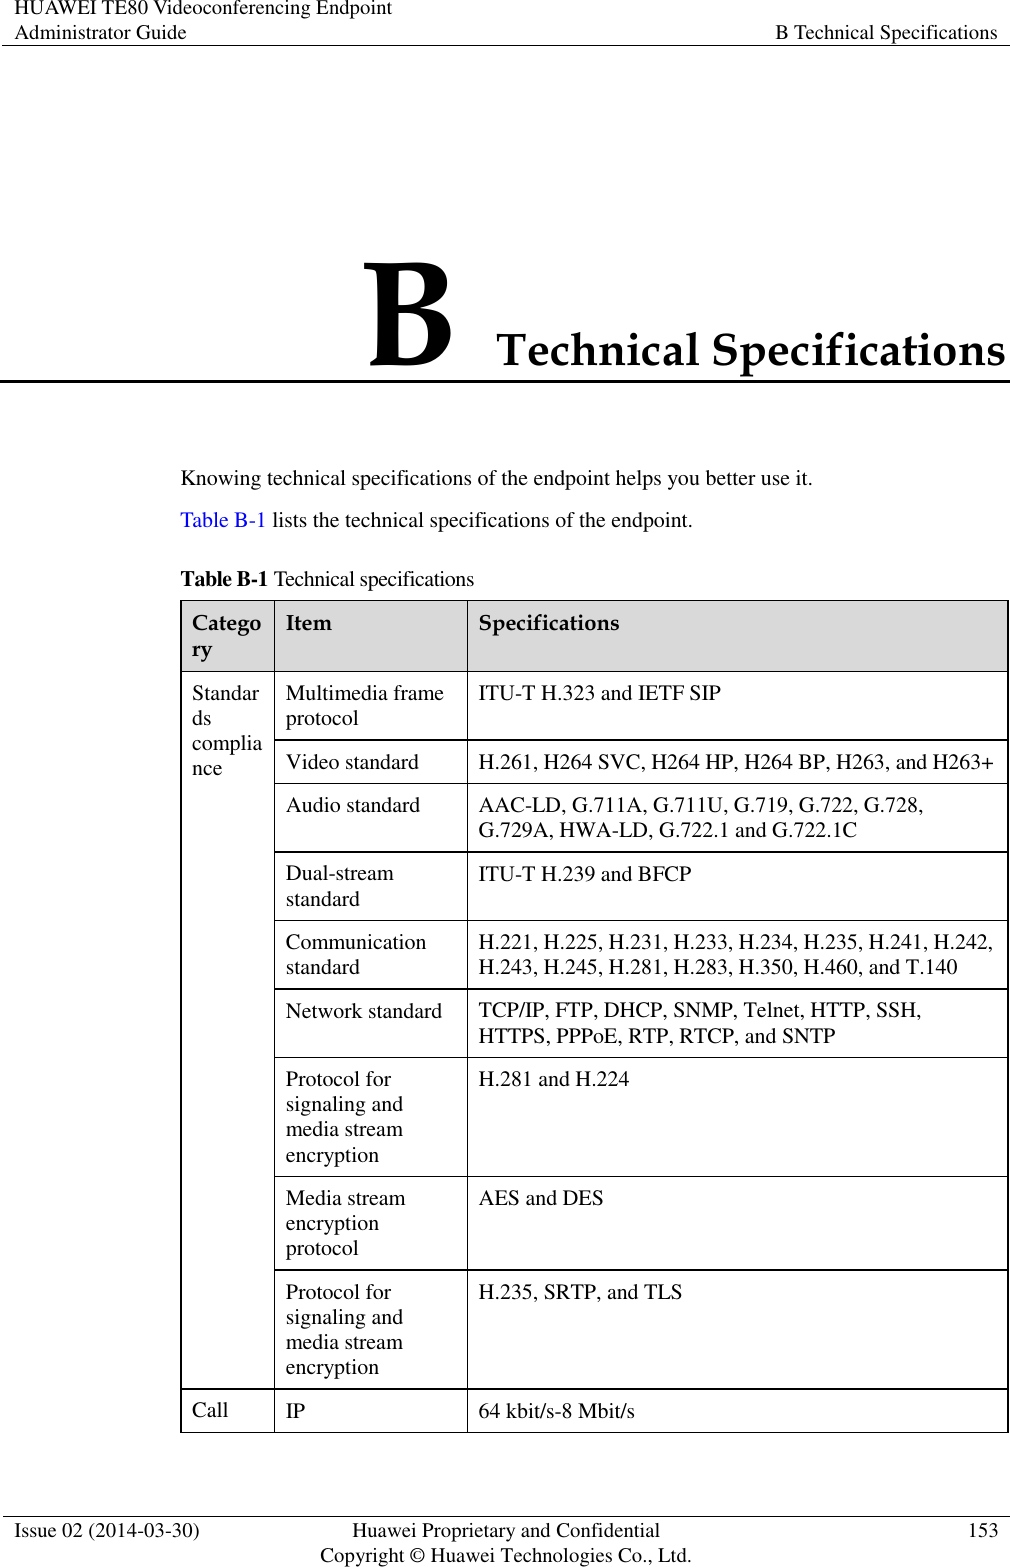 HUAWEI TE80 Videoconferencing Endpoint Administrator Guide B Technical Specifications  Issue 02 (2014-03-30) Huawei Proprietary and Confidential Copyright © Huawei Technologies Co., Ltd. 153  B Technical Specifications Knowing technical specifications of the endpoint helps you better use it. Table B-1 lists the technical specifications of the endpoint. Table B-1 Technical specifications Category Item Specifications Standards compliance Multimedia frame protocol ITU-T H.323 and IETF SIP Video standard H.261, H264 SVC, H264 HP, H264 BP, H263, and H263+ Audio standard AAC-LD, G.711A, G.711U, G.719, G.722, G.728, G.729A, HWA-LD, G.722.1 and G.722.1C Dual-stream standard ITU-T H.239 and BFCP Communication standard H.221, H.225, H.231, H.233, H.234, H.235, H.241, H.242, H.243, H.245, H.281, H.283, H.350, H.460, and T.140 Network standard TCP/IP, FTP, DHCP, SNMP, Telnet, HTTP, SSH, HTTPS, PPPoE, RTP, RTCP, and SNTP Protocol for signaling and media stream encryption H.281 and H.224 Media stream encryption protocol AES and DES Protocol for signaling and media stream encryption H.235, SRTP, and TLS Call IP 64 kbit/s-8 Mbit/s 